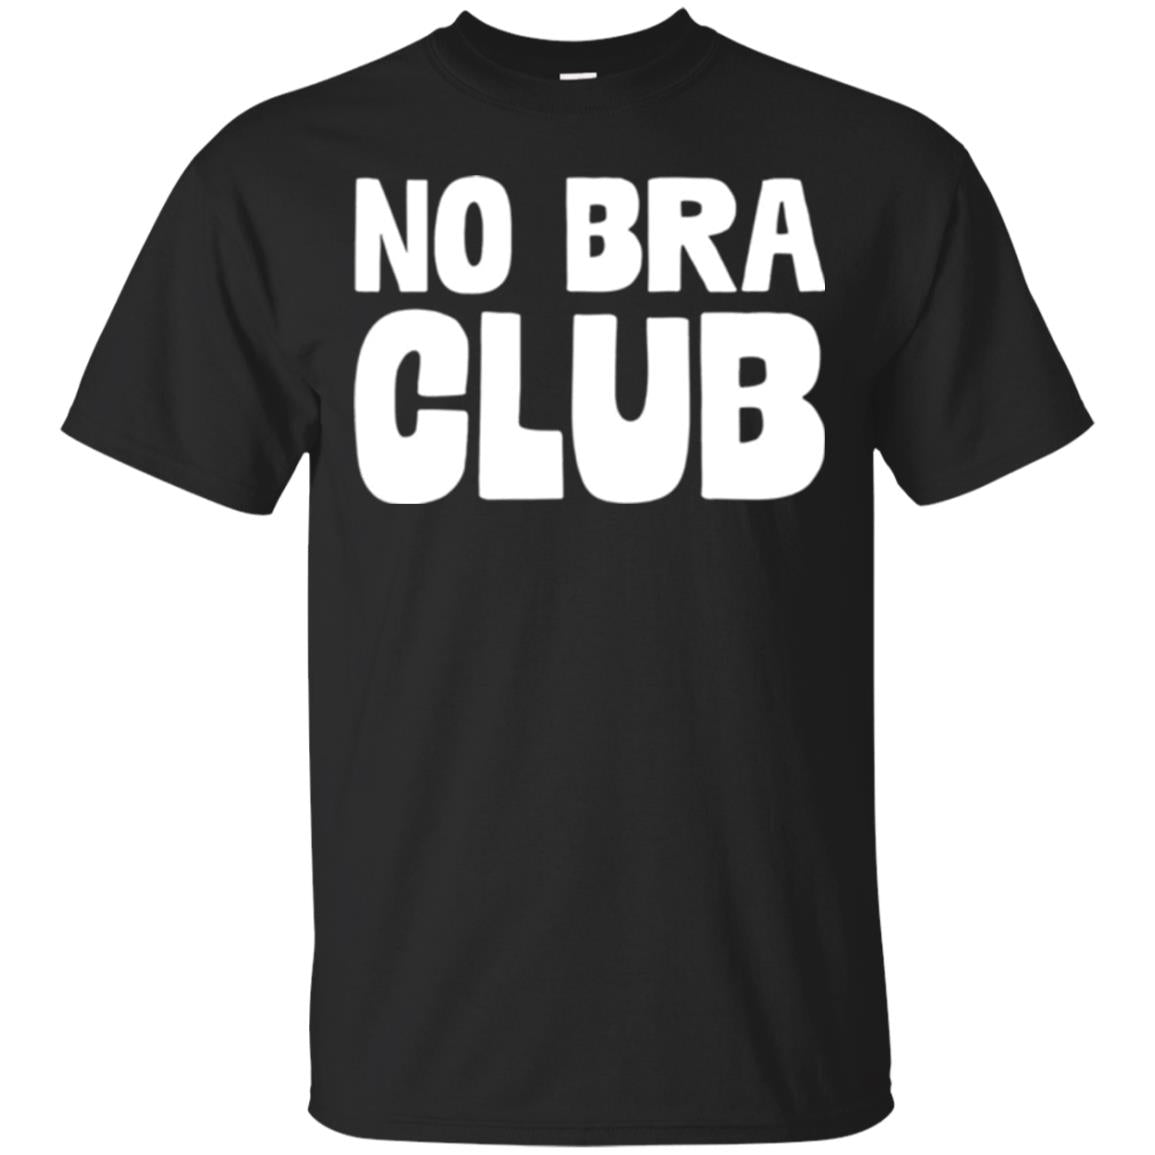 No Bra Club Smiley Faces Funny Women's Gift T Shirt